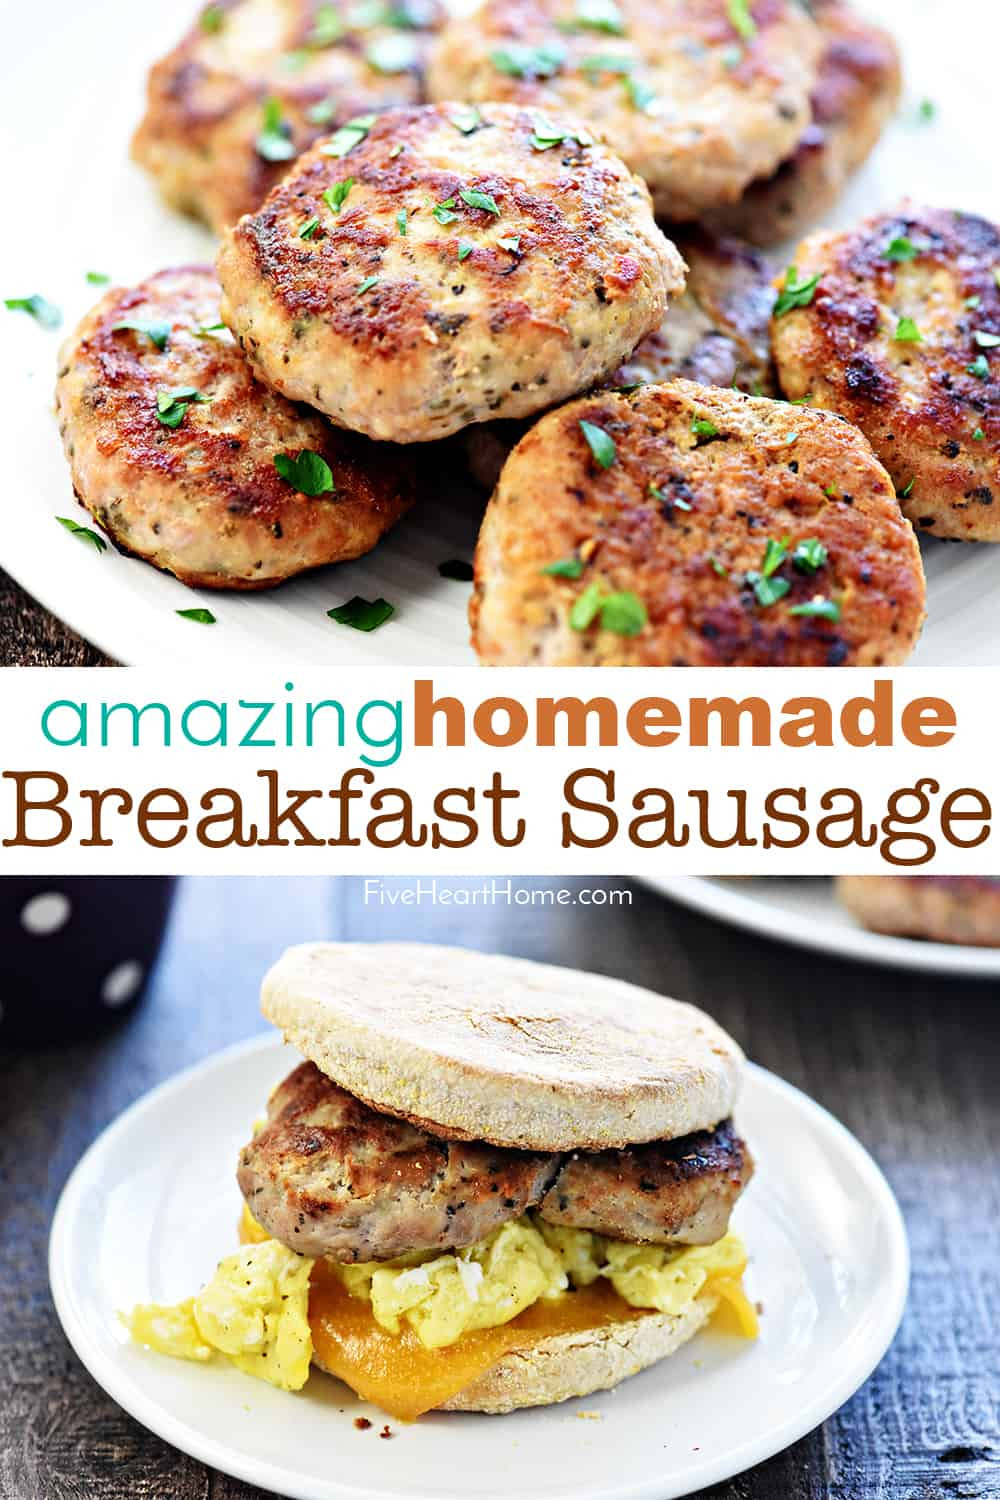 Breakfast Recipes With Sausage
 AMAZING Homemade Breakfast Sausage • FIVEheartHOME